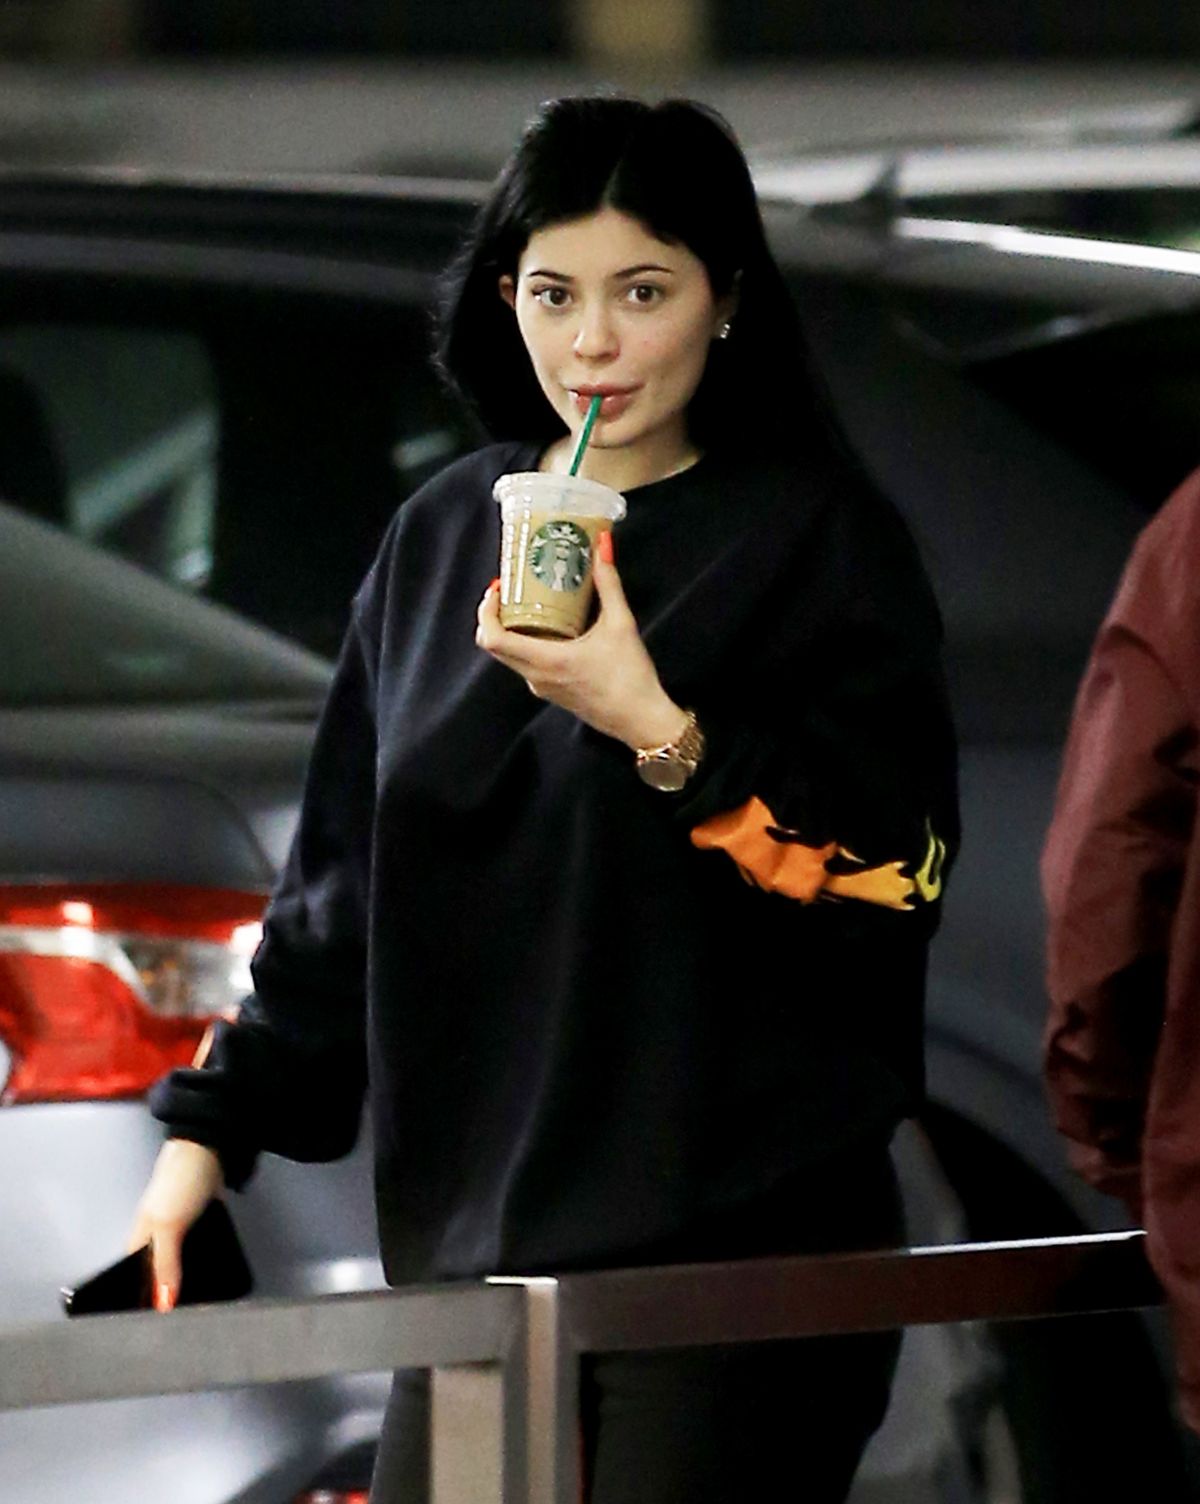 KYLIE JENNER Without Makeup Leaves a Starbucks in Beverly Hills 03/30/2017.